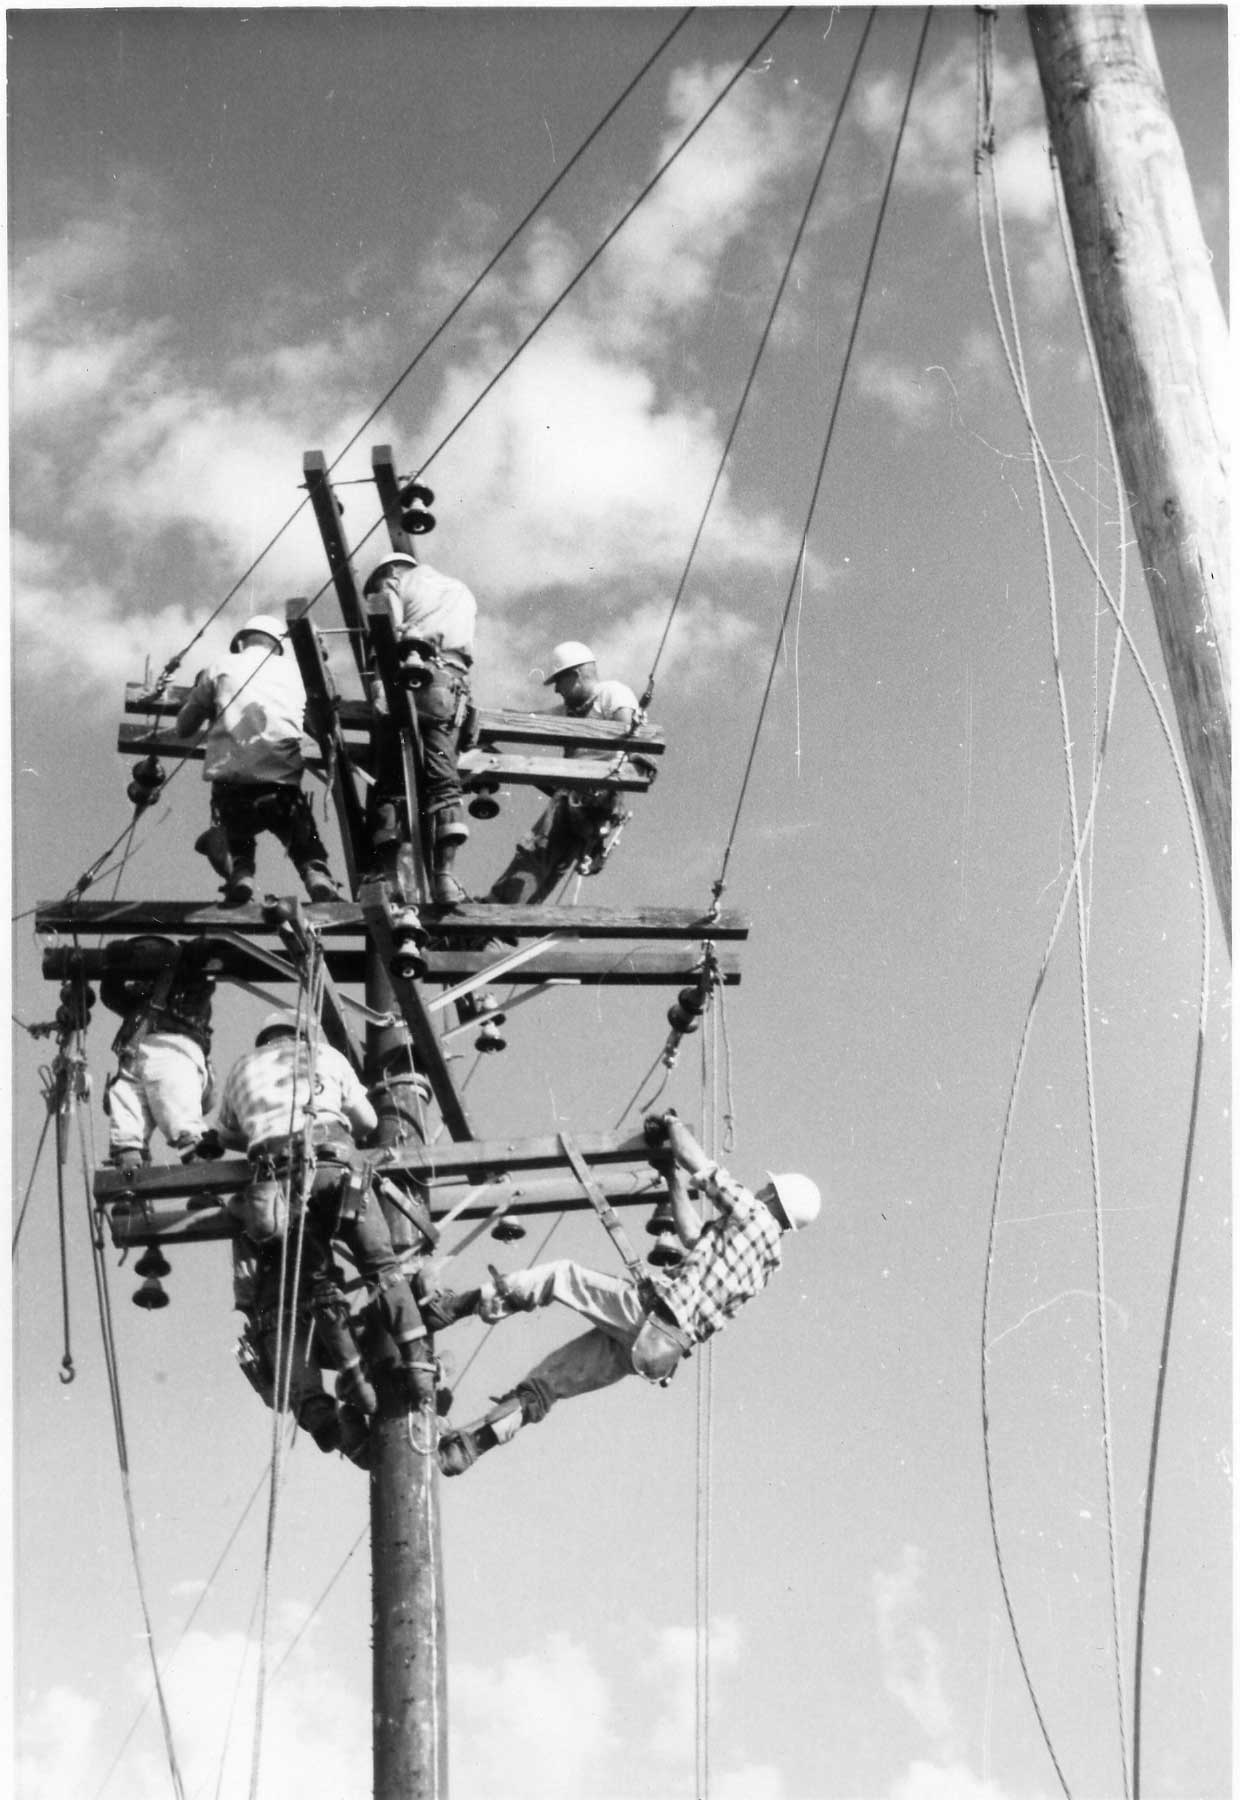 Seven linemen on top of a power pole